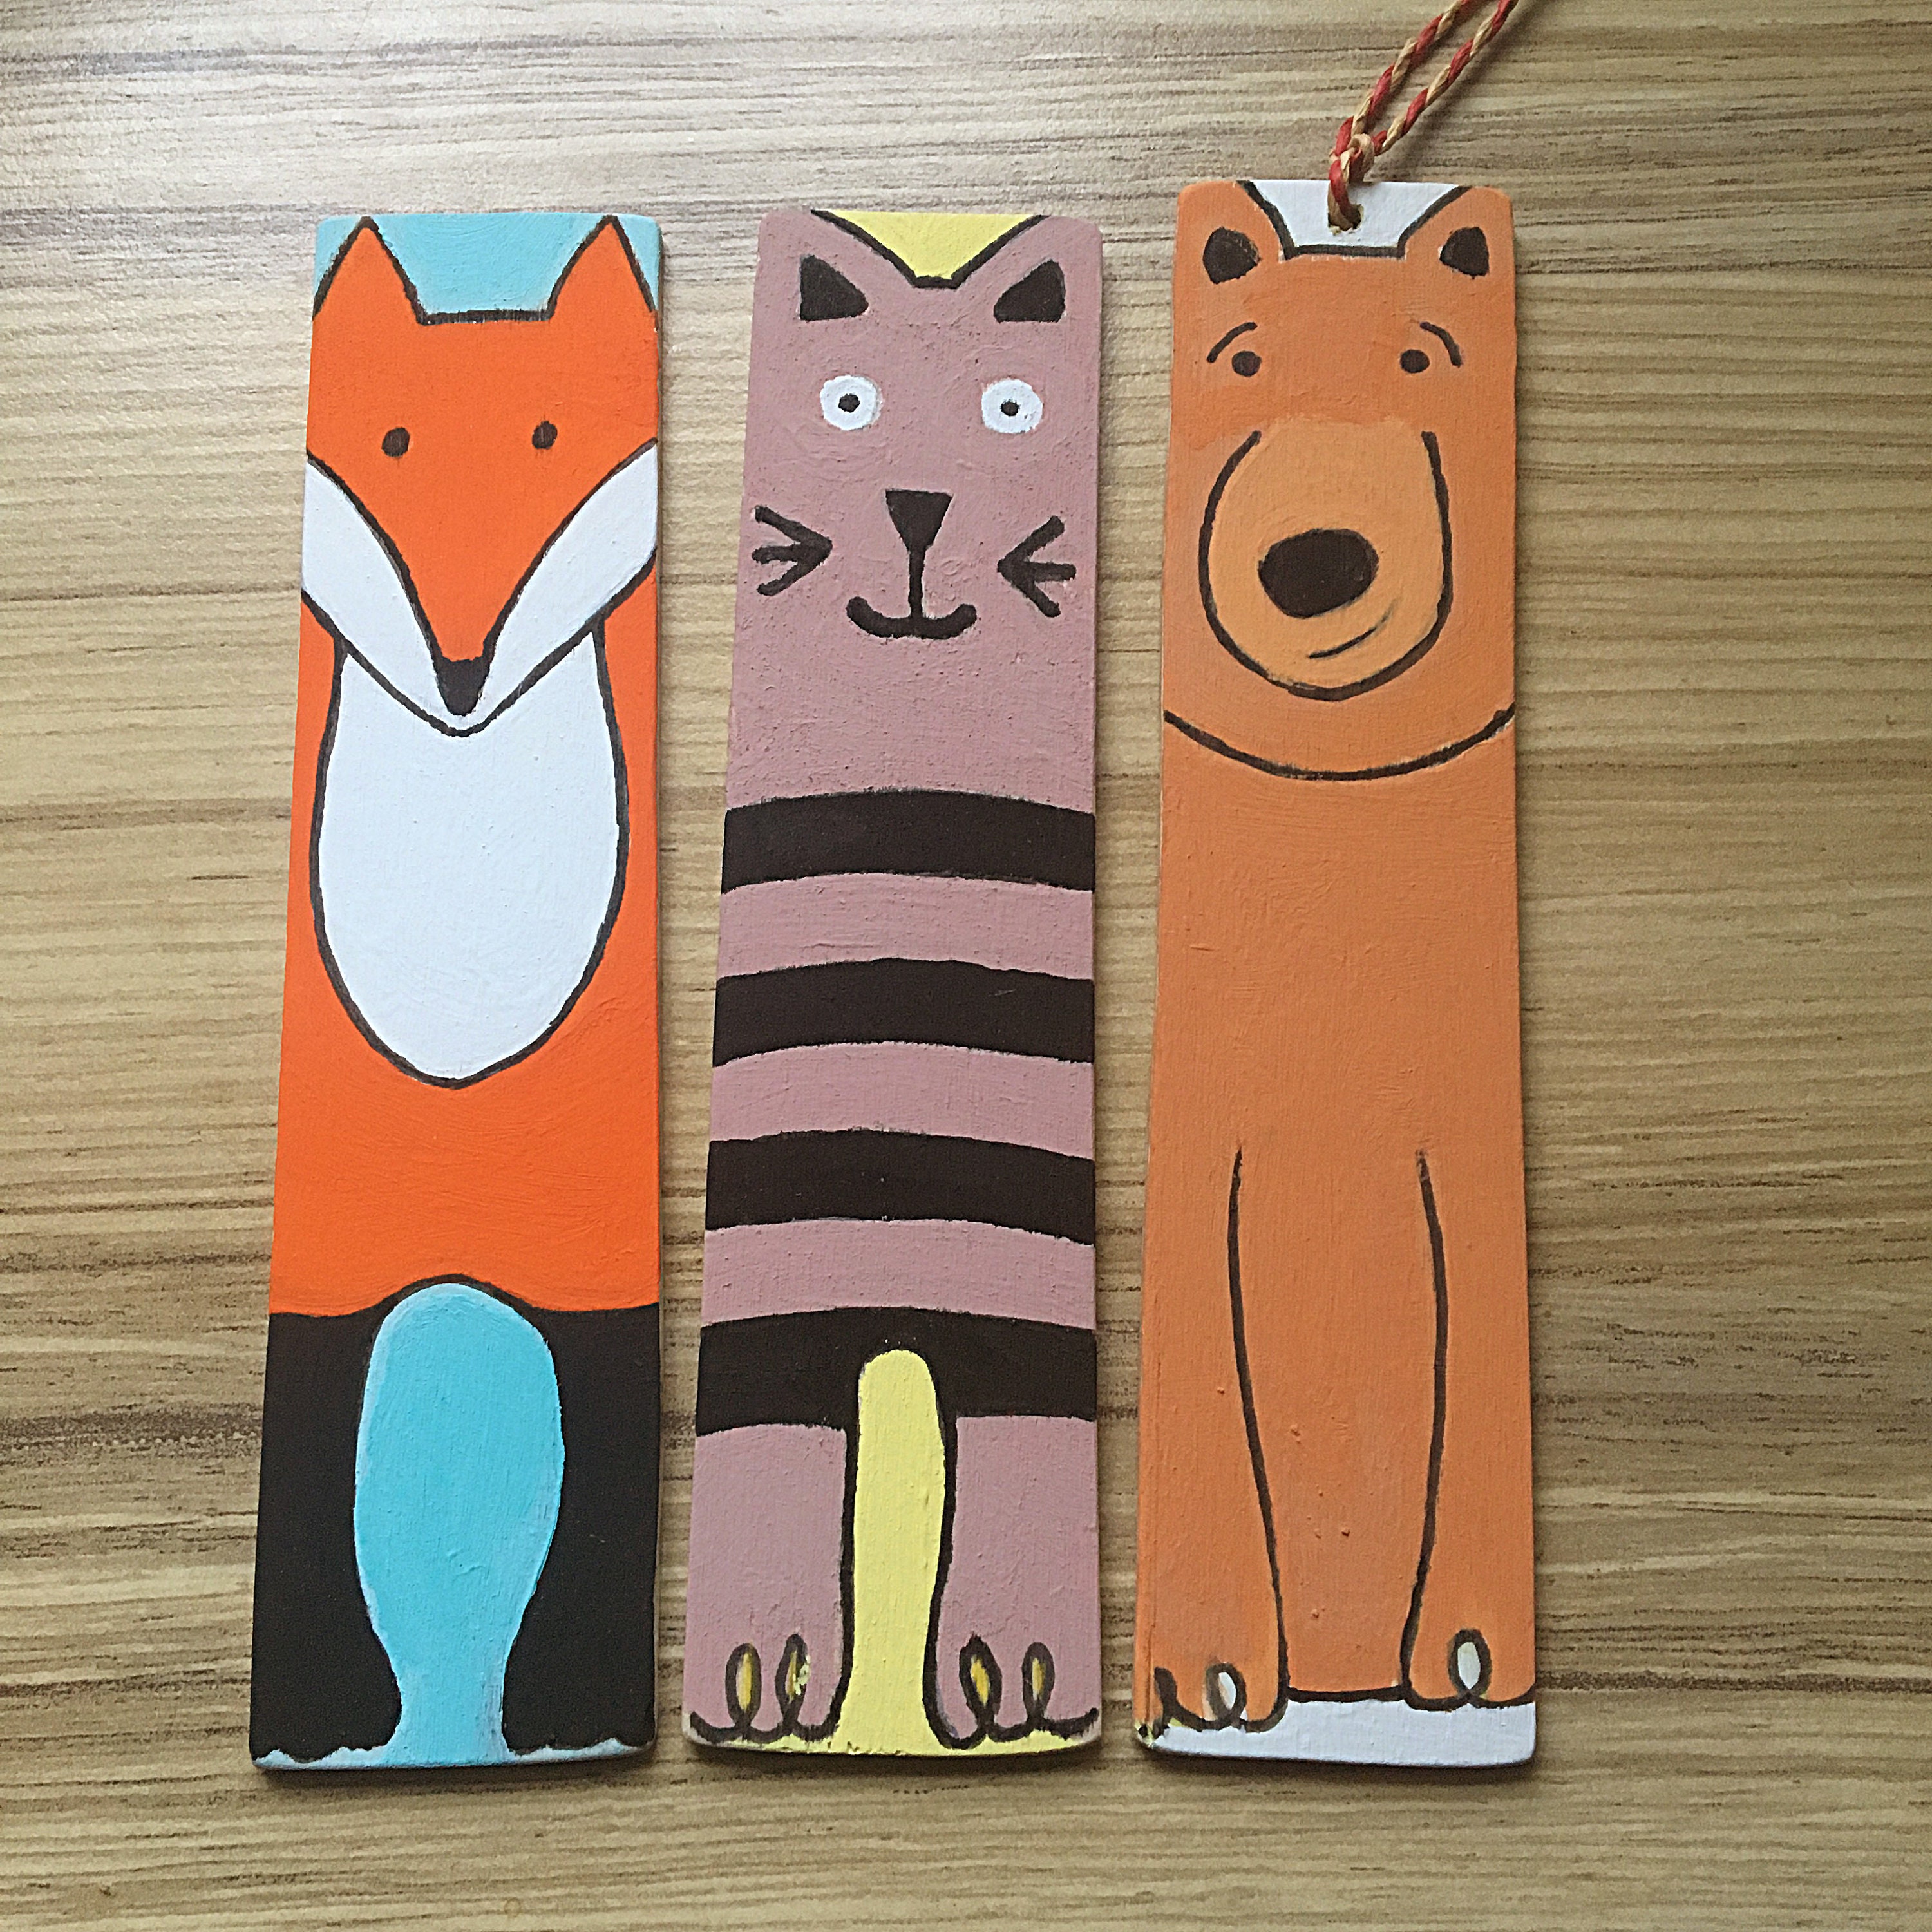 Personalized wooden bookmarks, Fun characters for Kids with